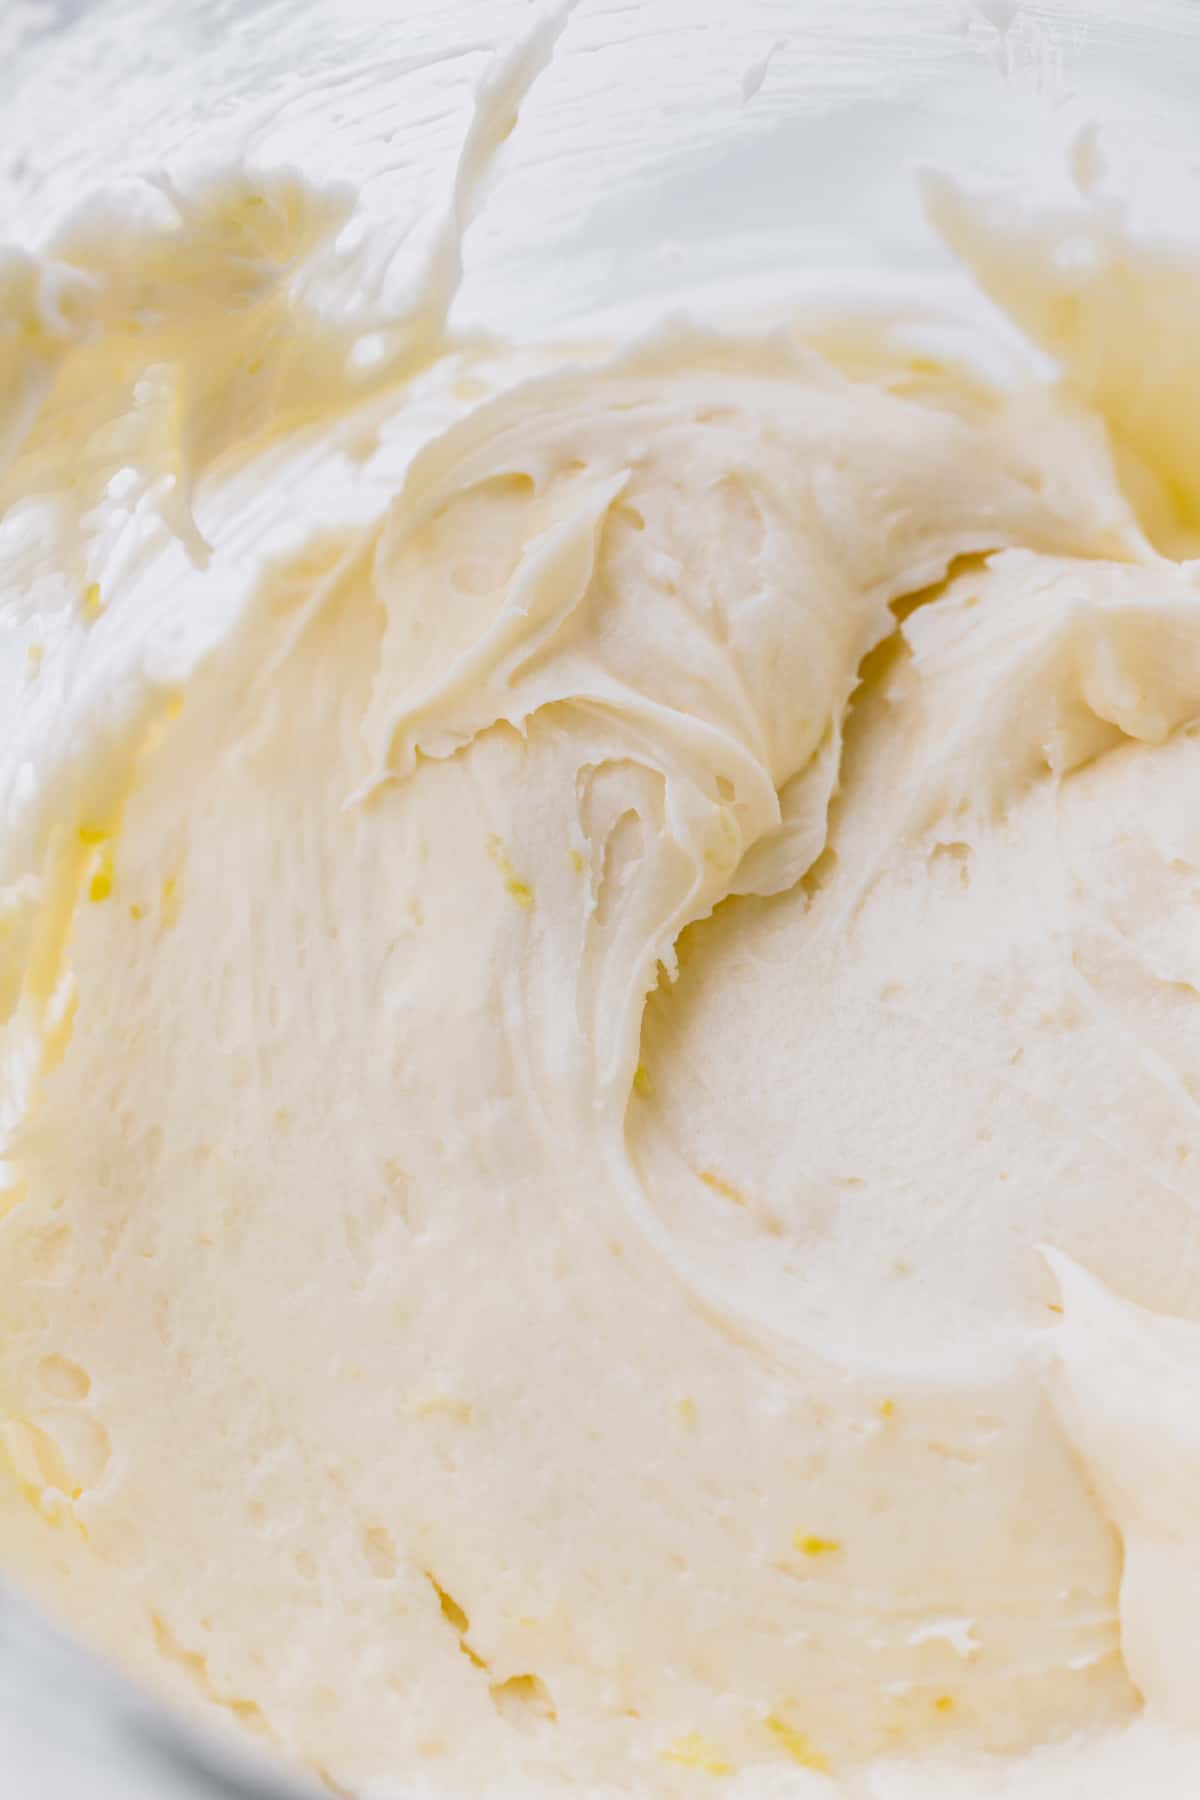 Lemon cream cheese frosting in a glass bowl.